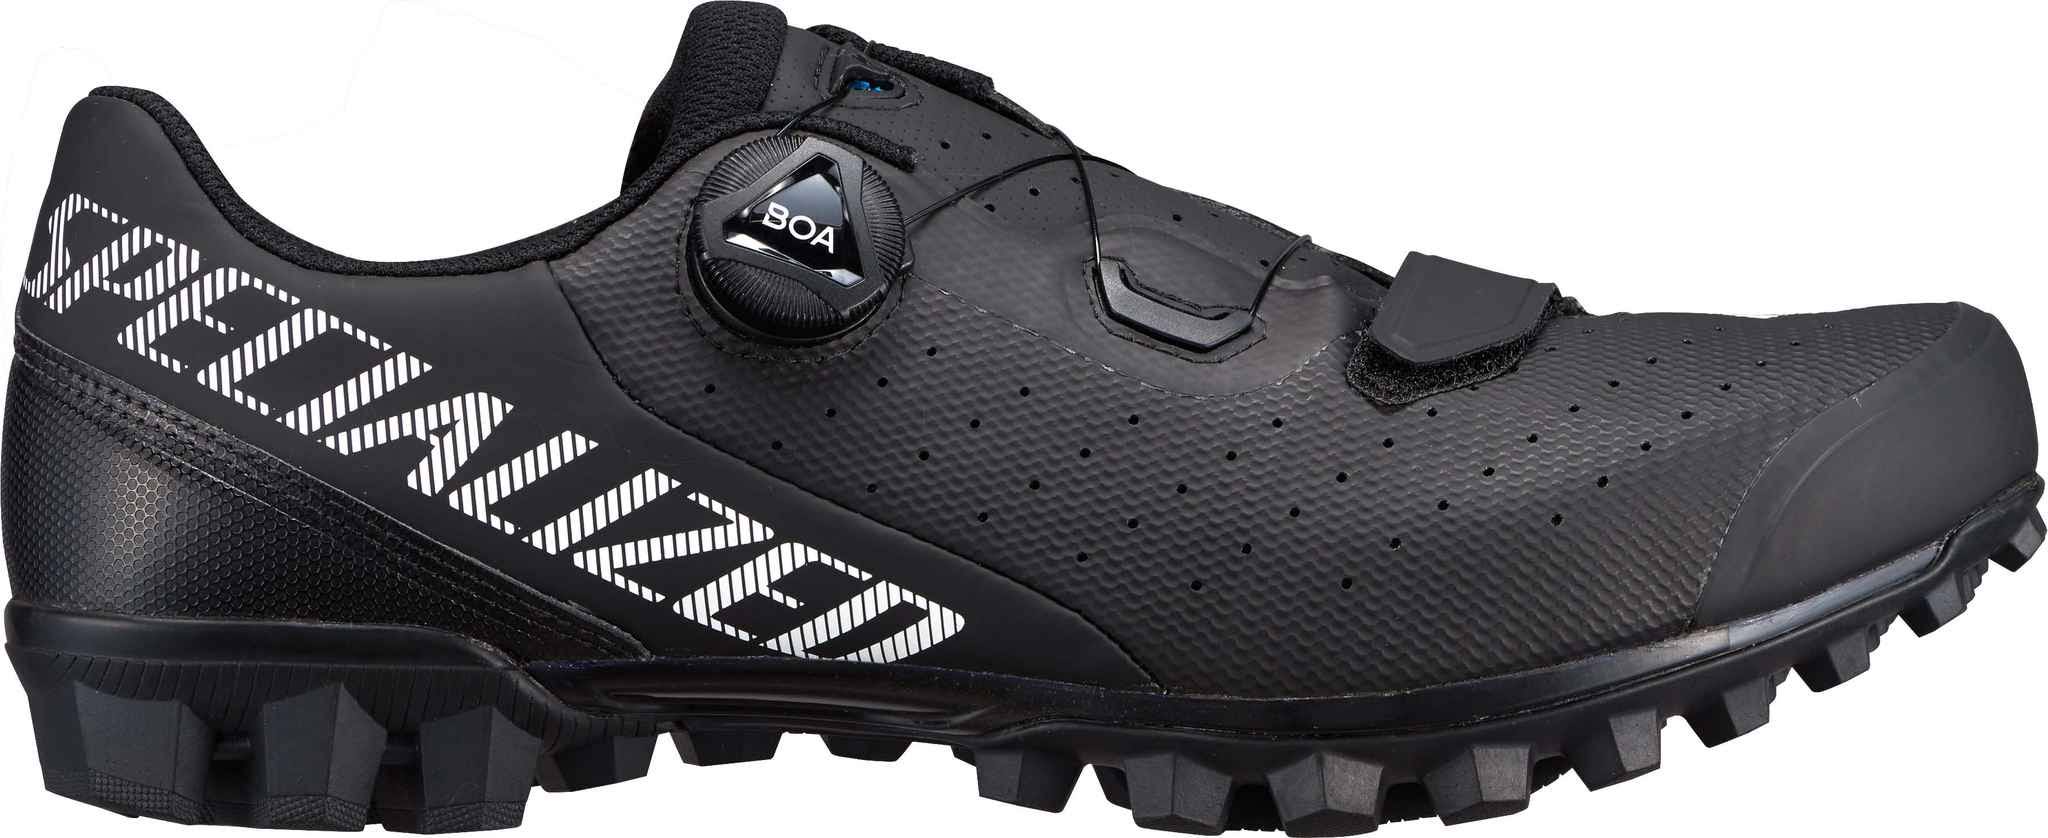 Specialized Recon 2.0 MTB Shoes 40 - Black